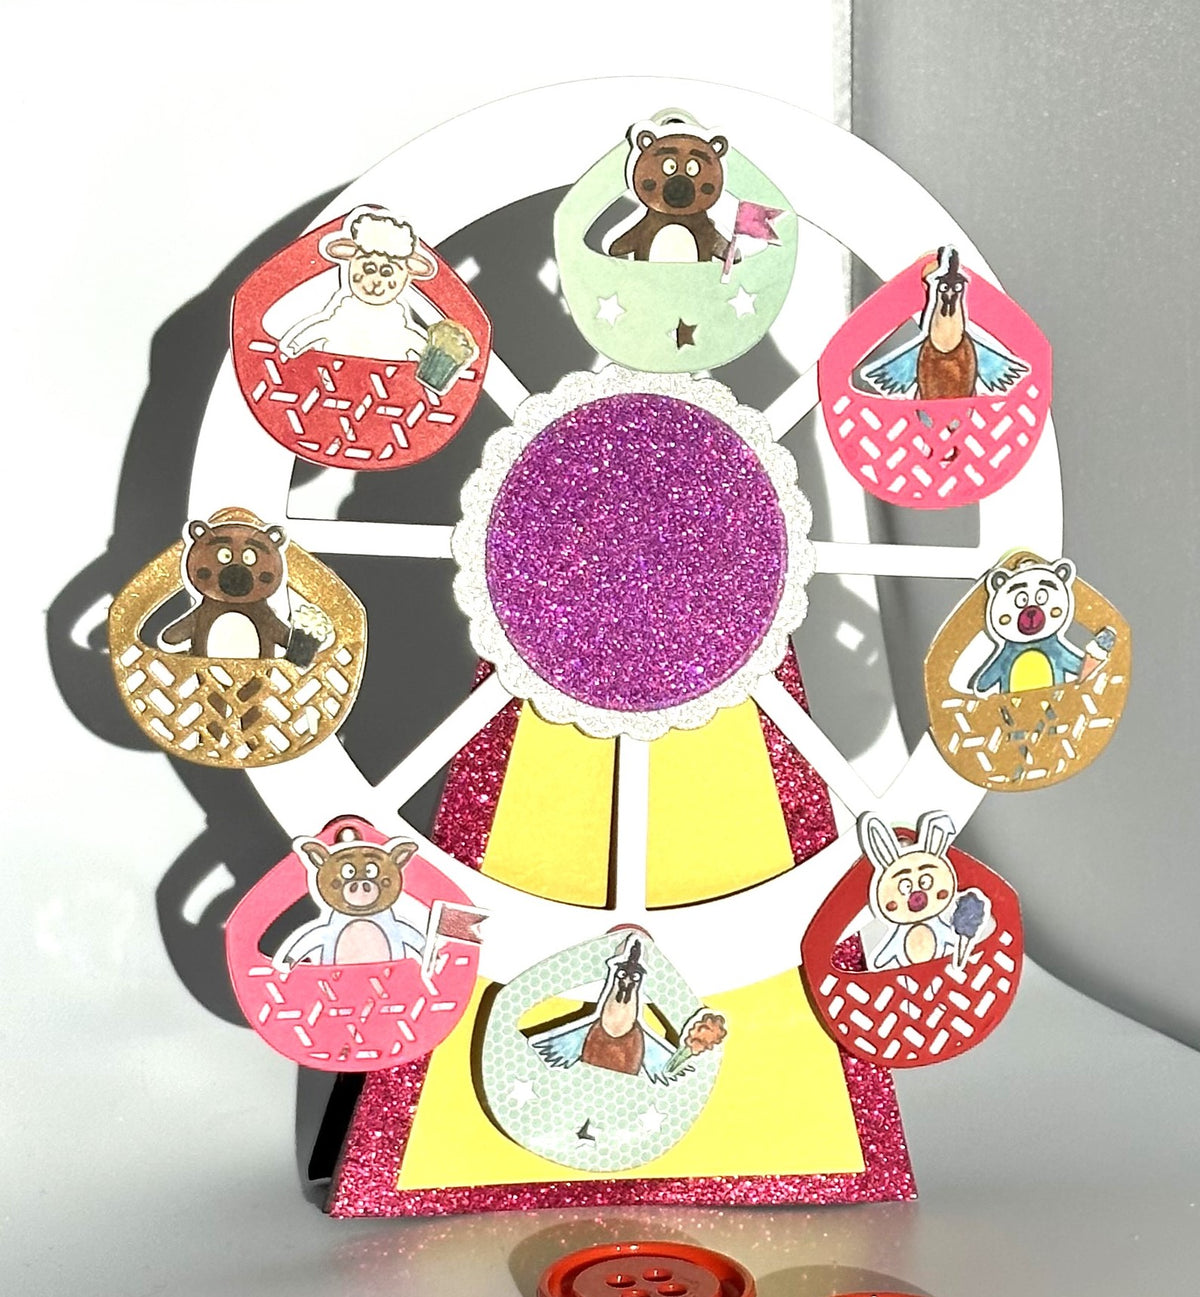 3D Interactive Greeting or Birthday Ferry's Wheel Card Yellow and White